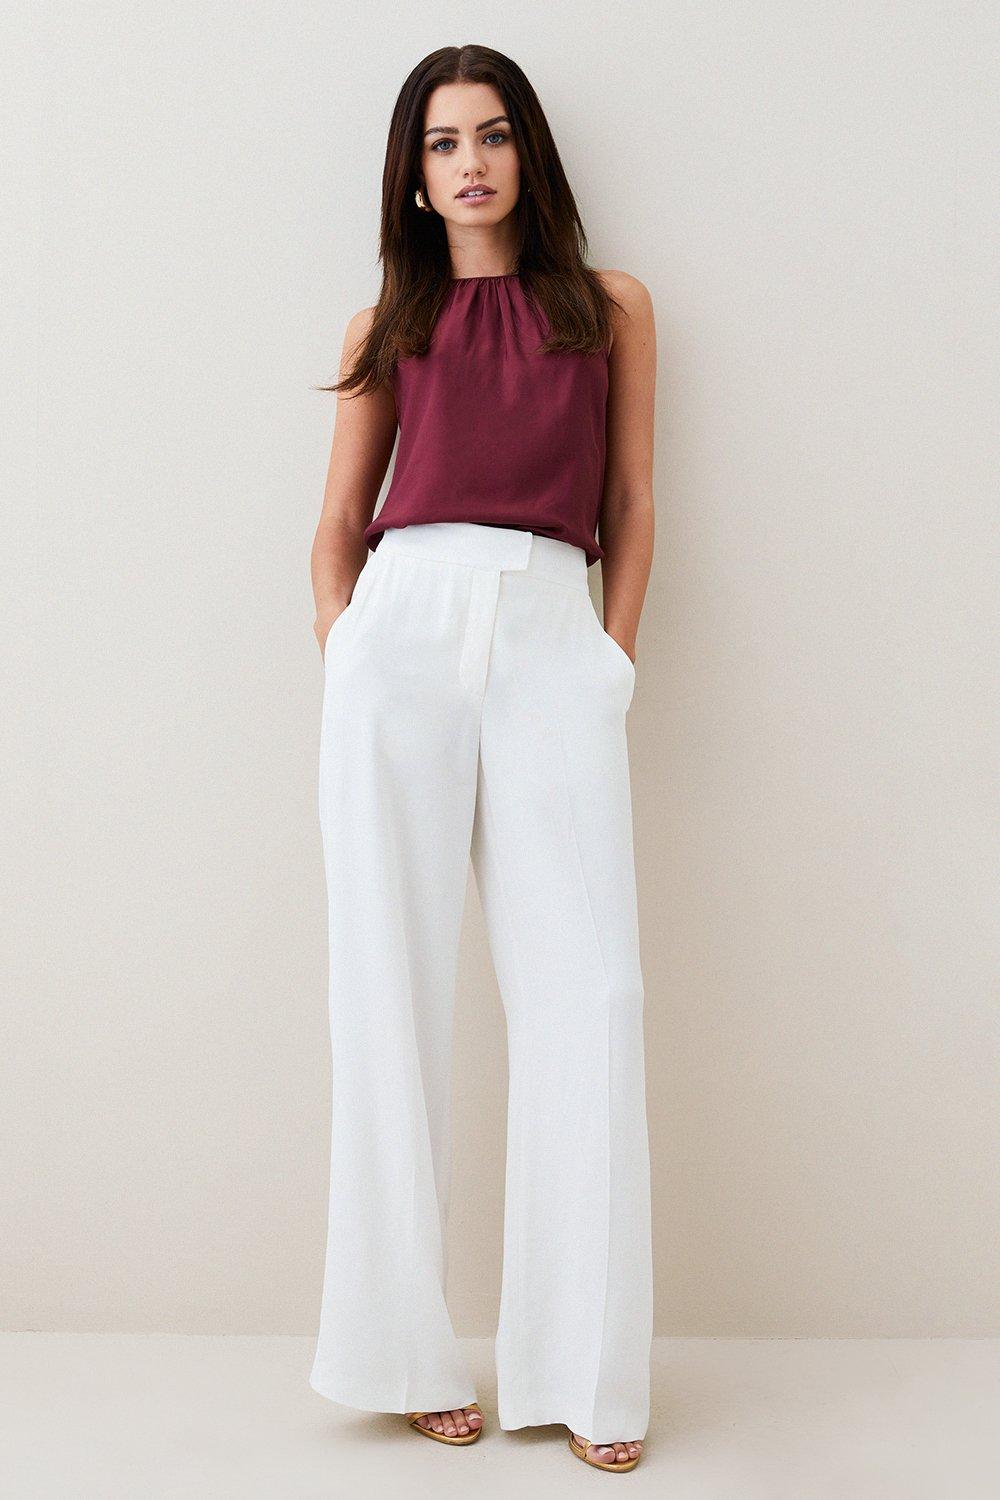 Tall Women's Trousers, Long Length Ladies Trousers